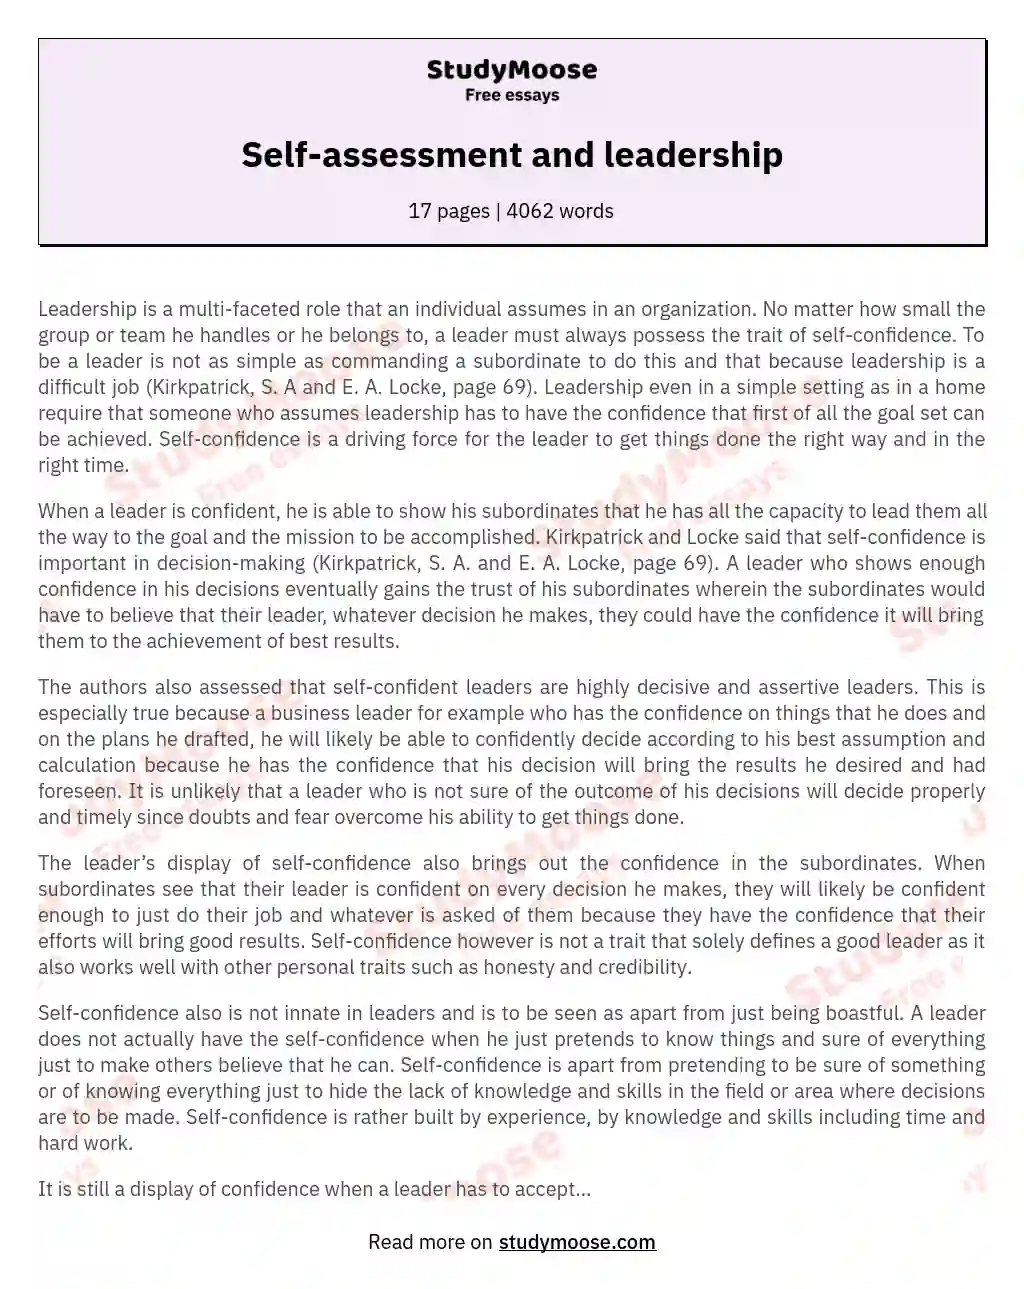 Self-assessment and leadership